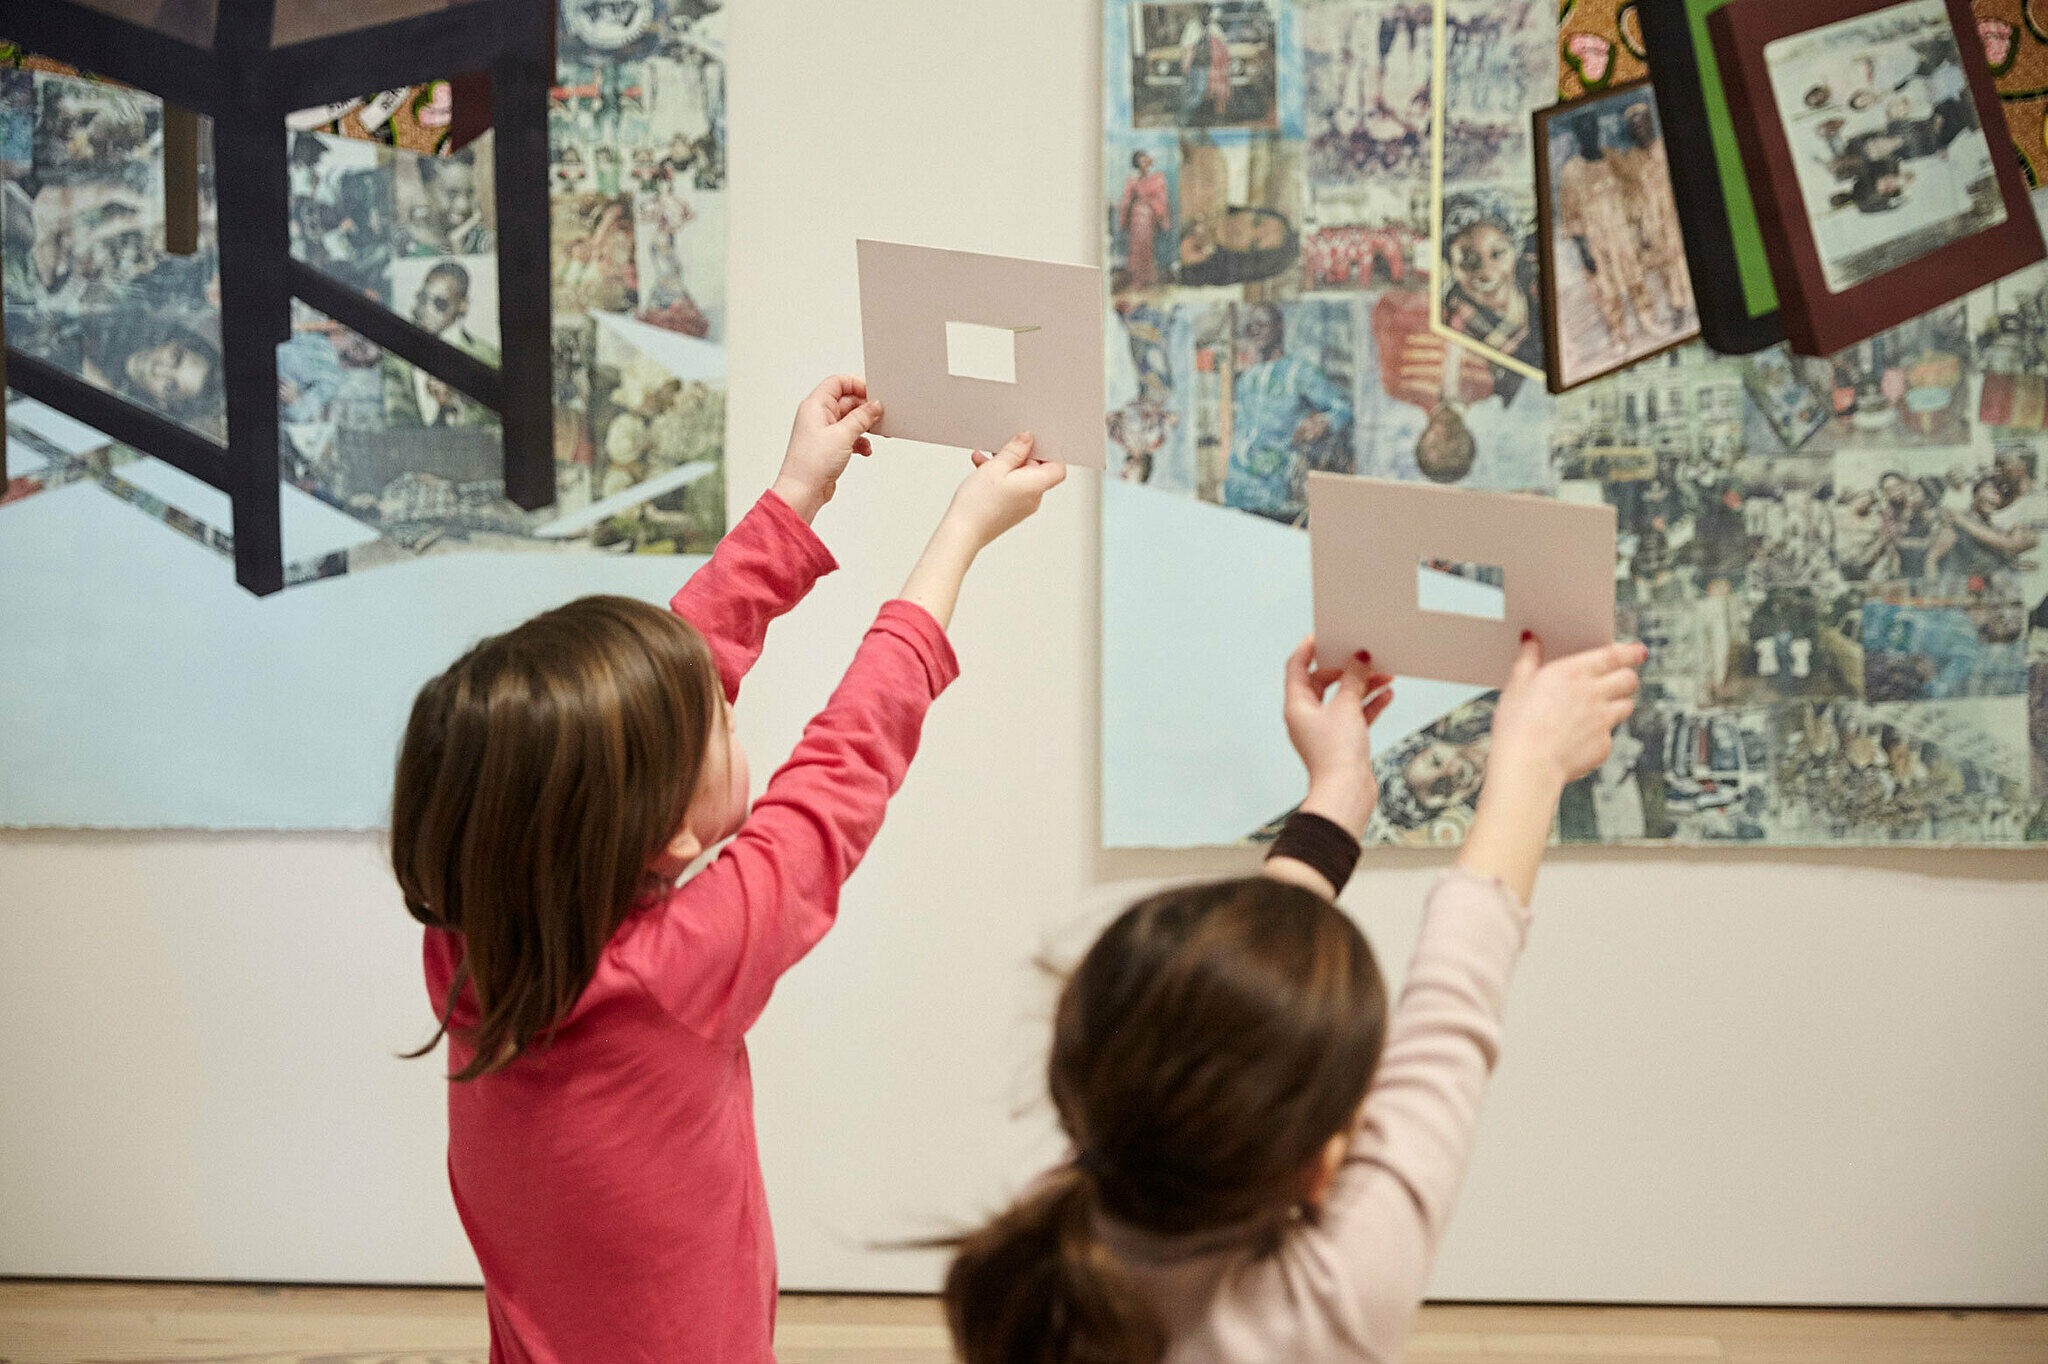 Children engaging with works on view